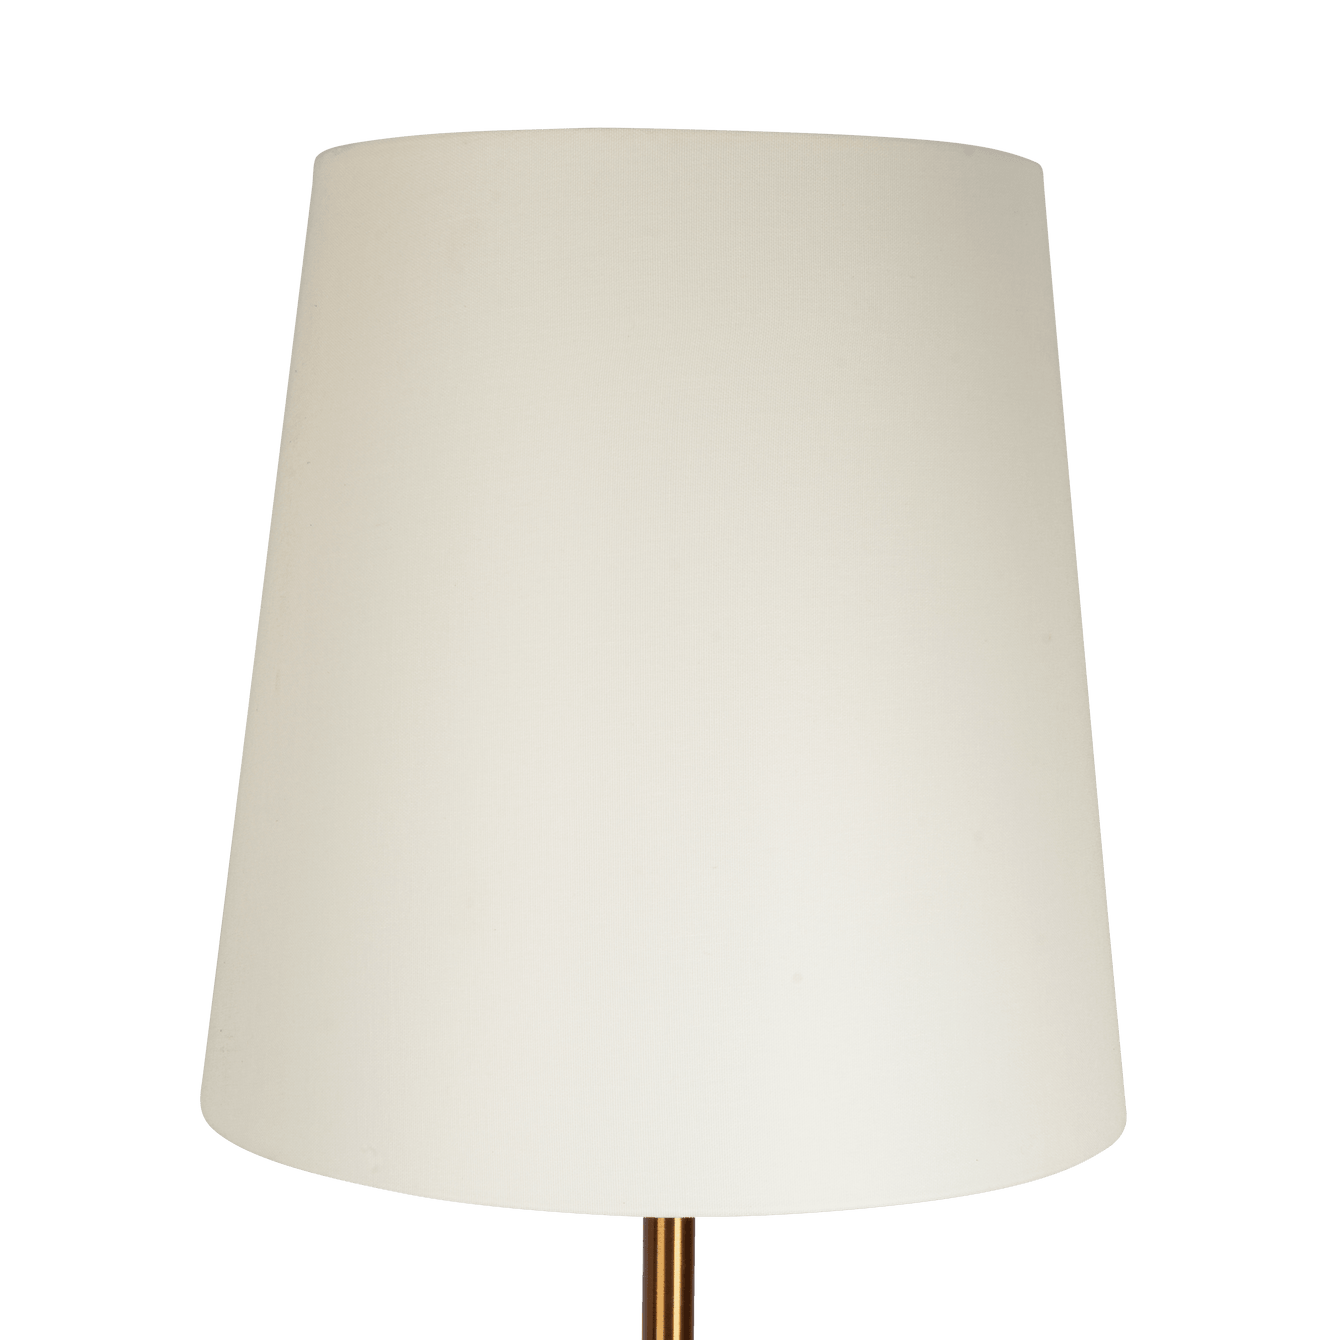 Celestial Modern Floor Lamp with Brass Accent Table with Large White Shade - West Lamp